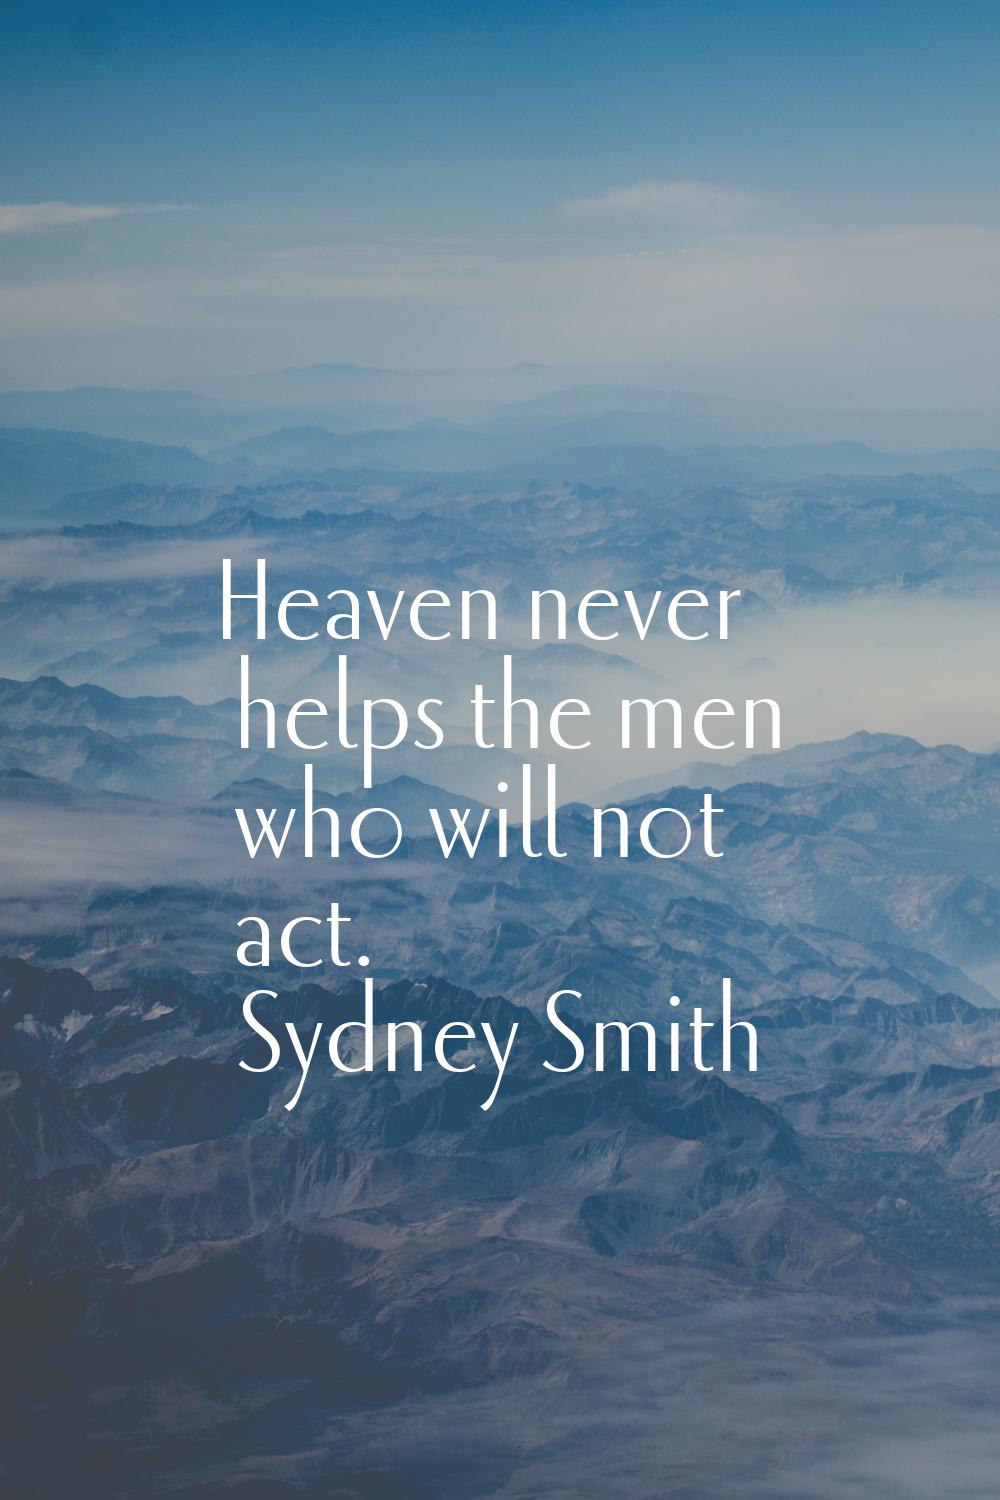 Heaven never helps the men who will not act.